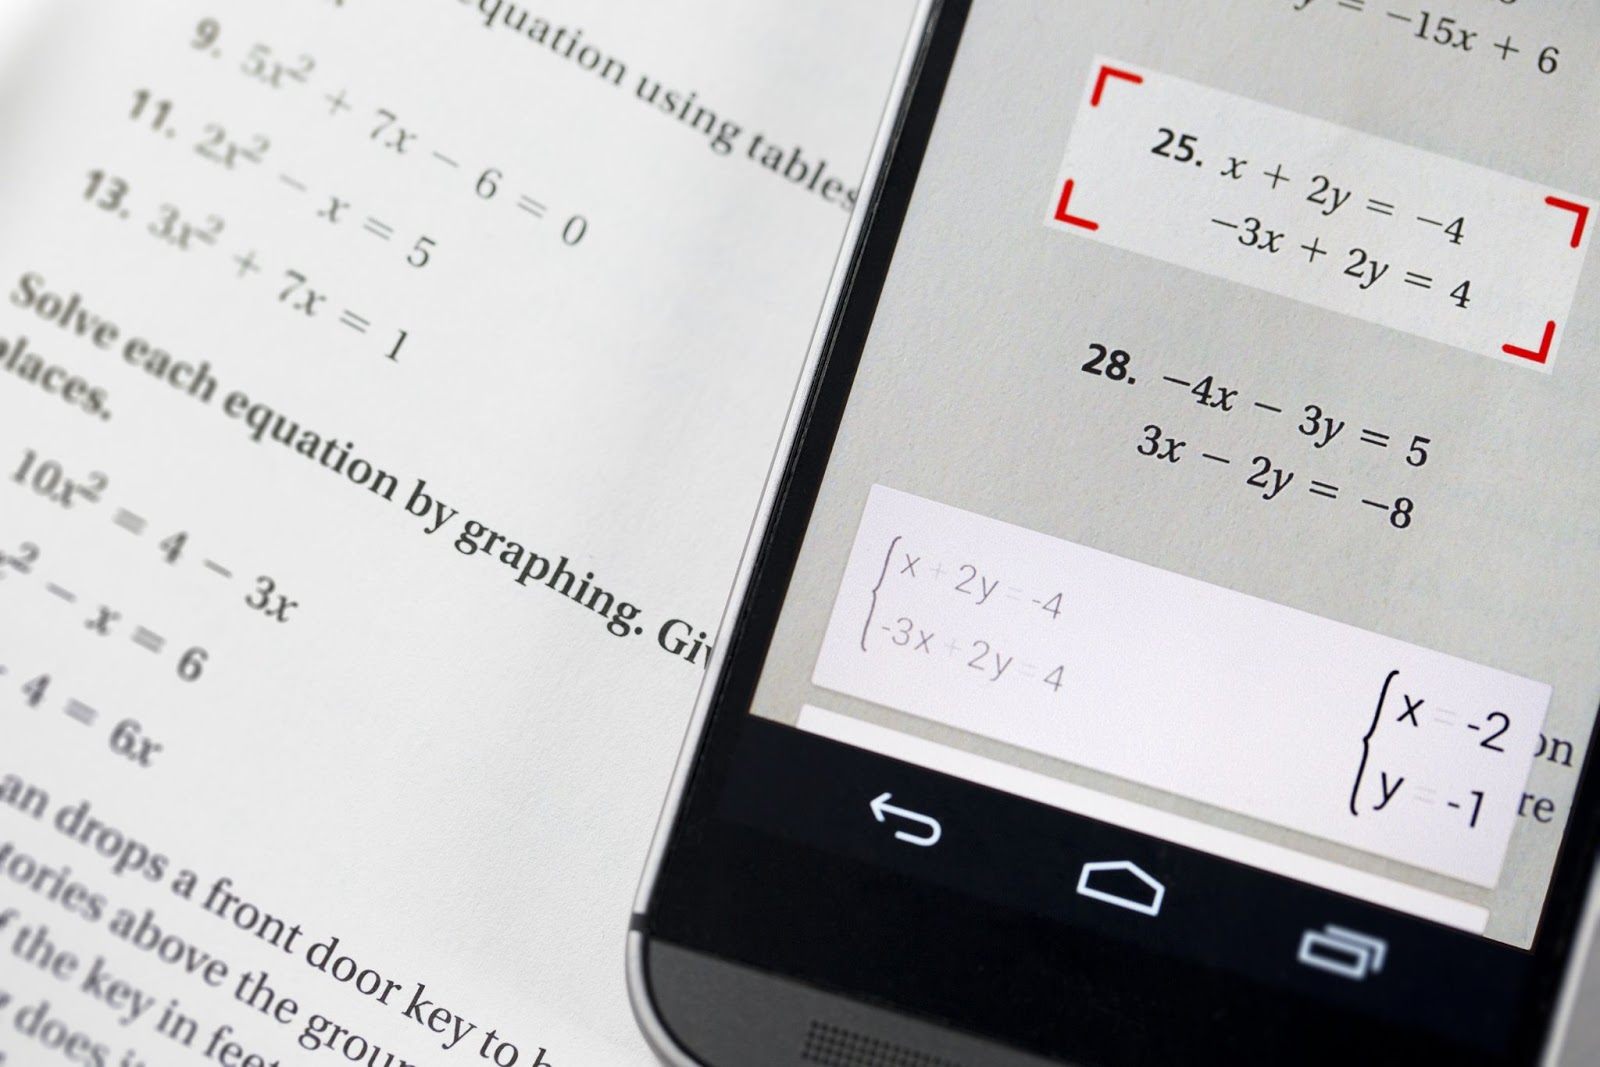 Math by Microsoft: Check Out the Microsoft Math Solver App